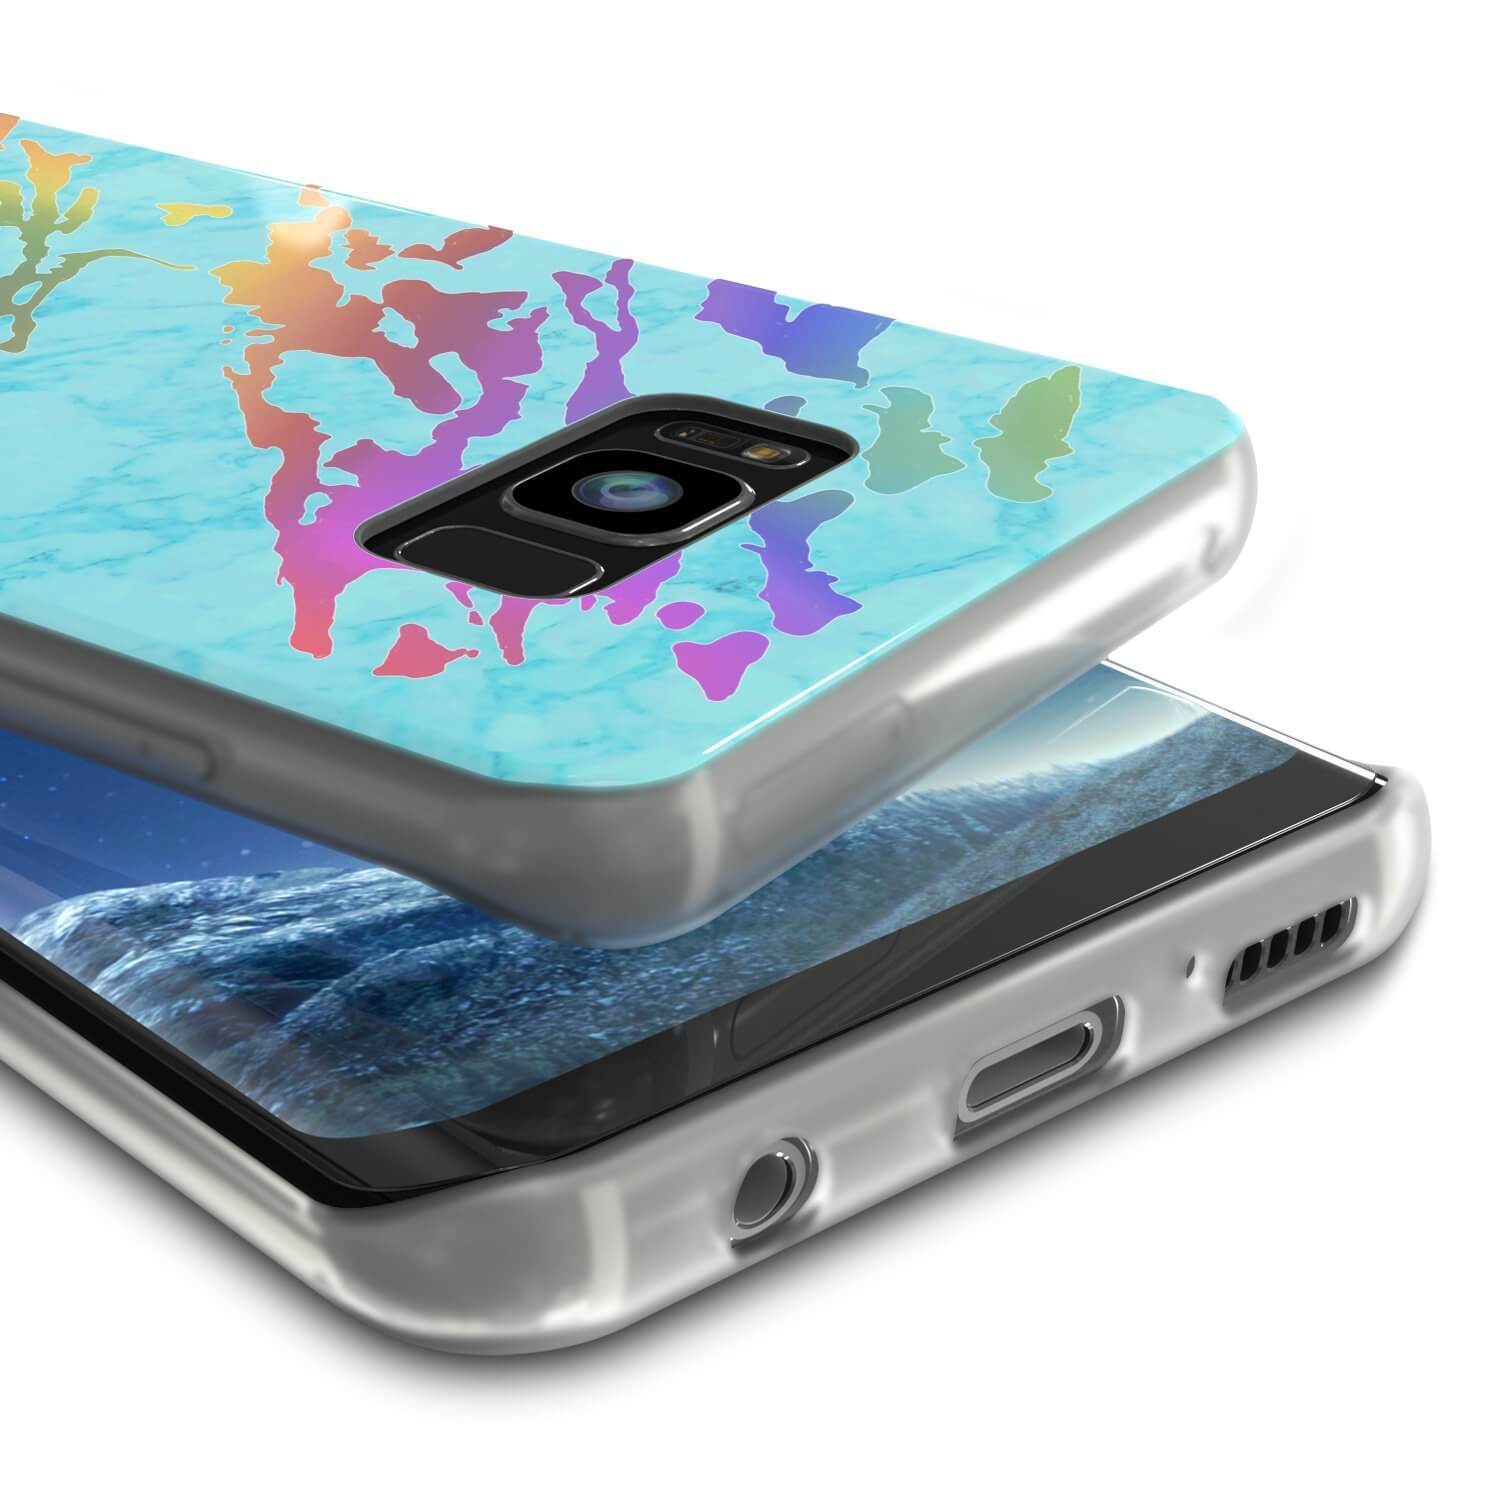 Punkcase Galaxy S8 Protective Full Body Marble Case | Teal Onyx